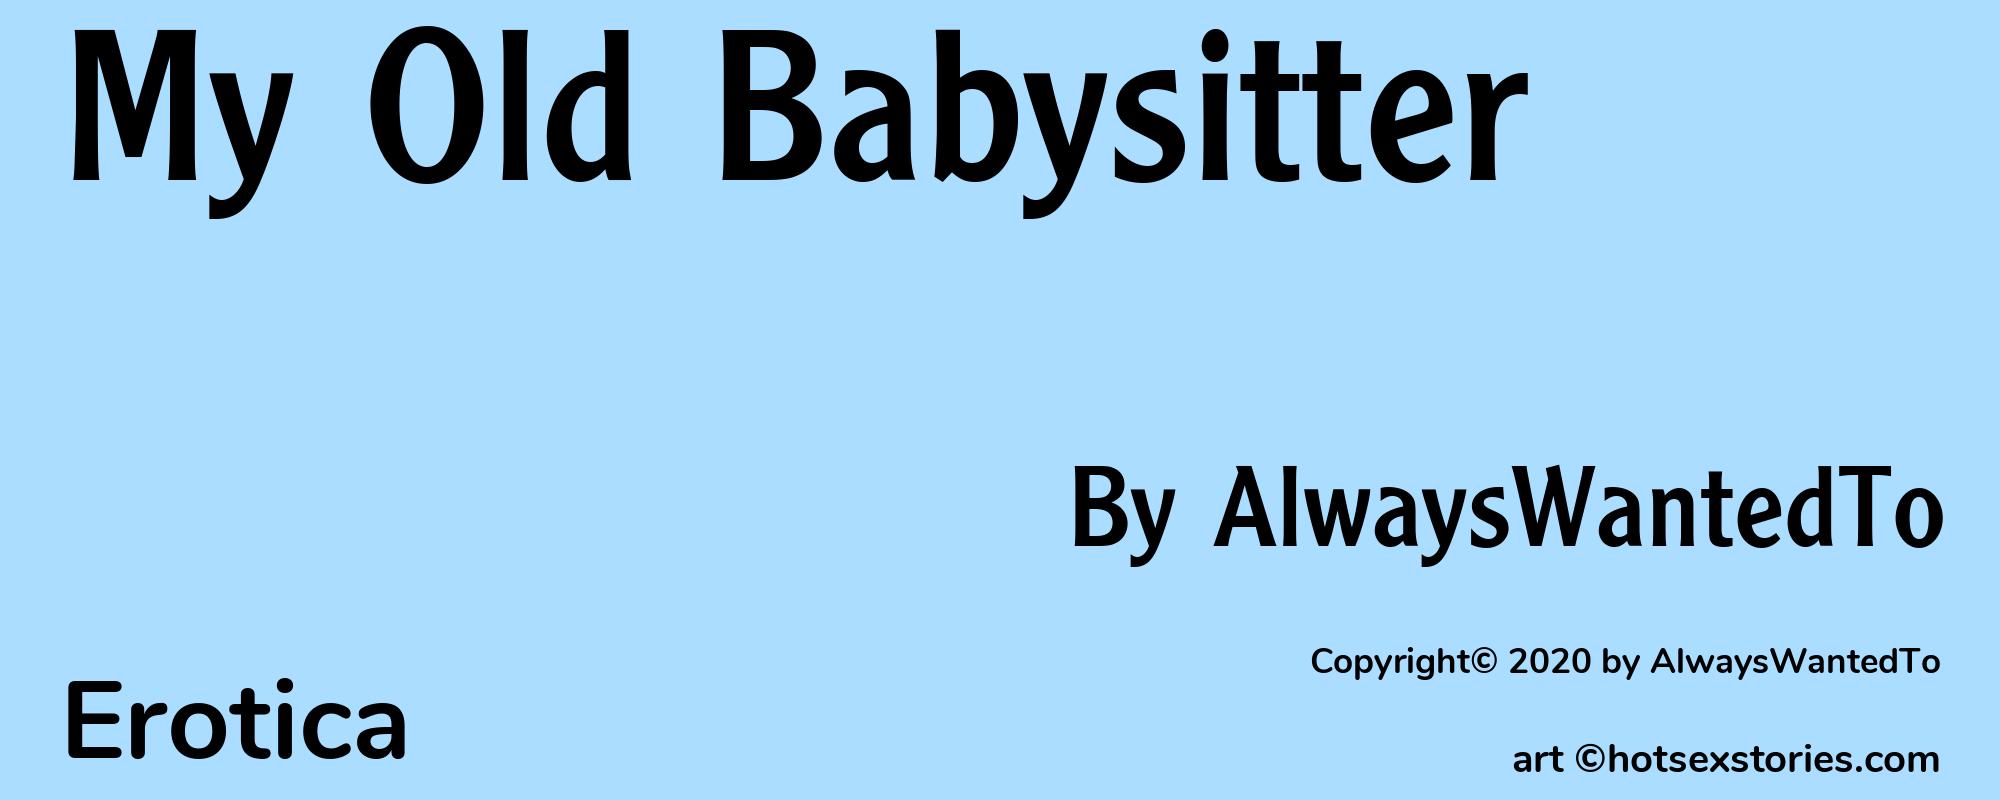 My Old Babysitter - Cover